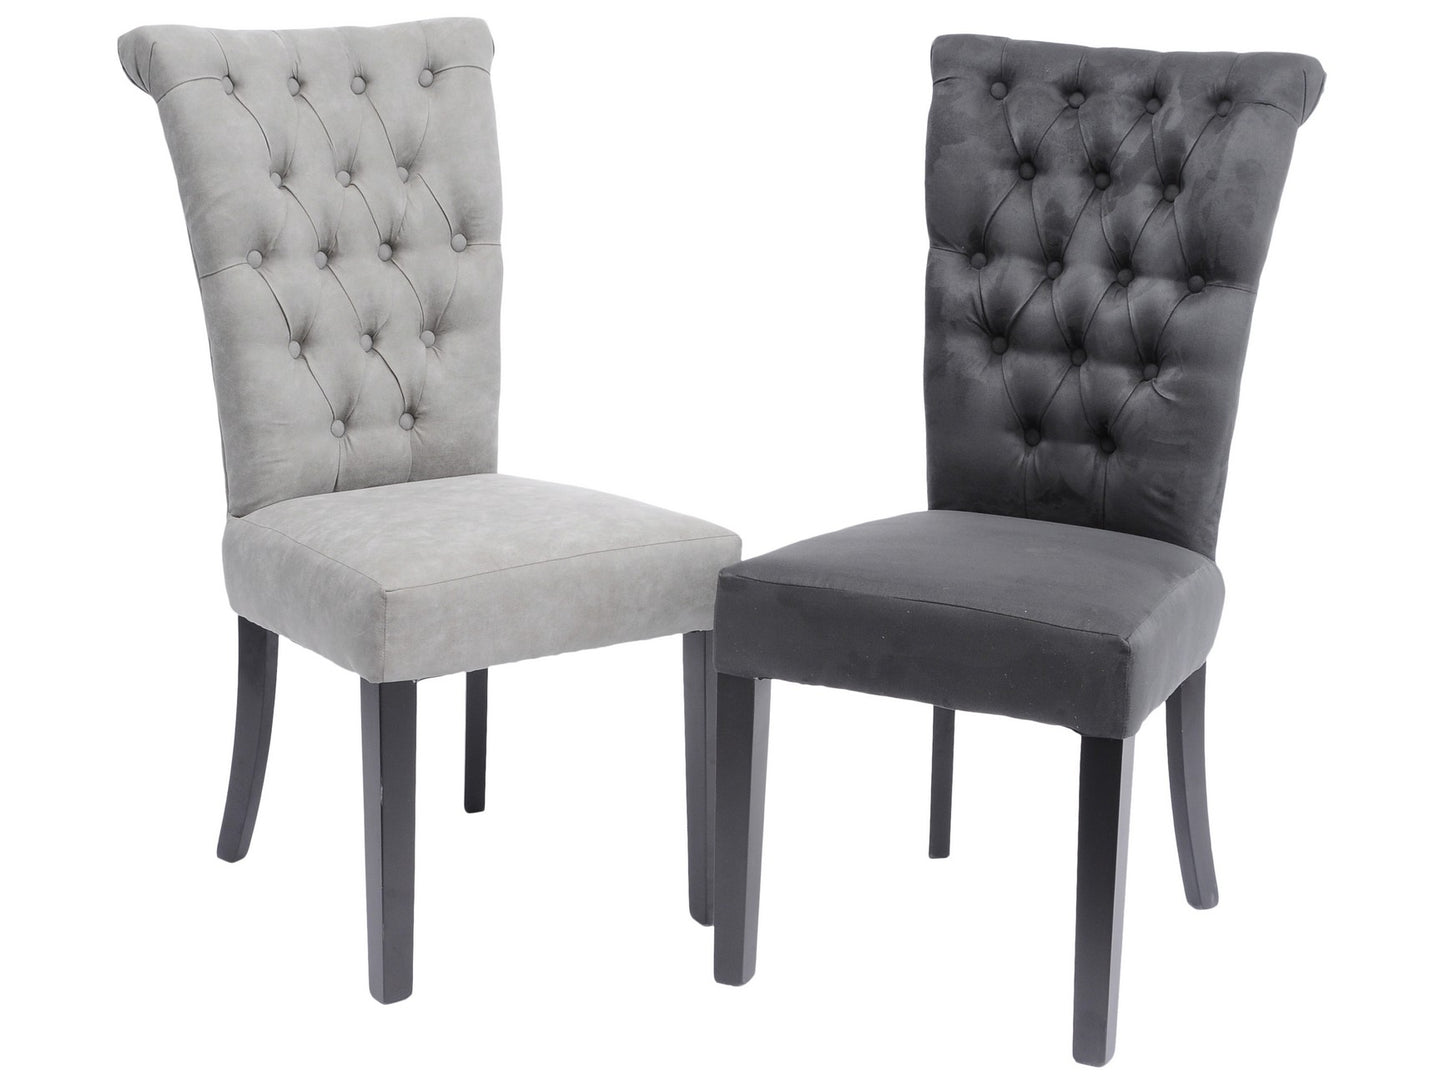 Midnight Grey Button-Tufted Dining Chair